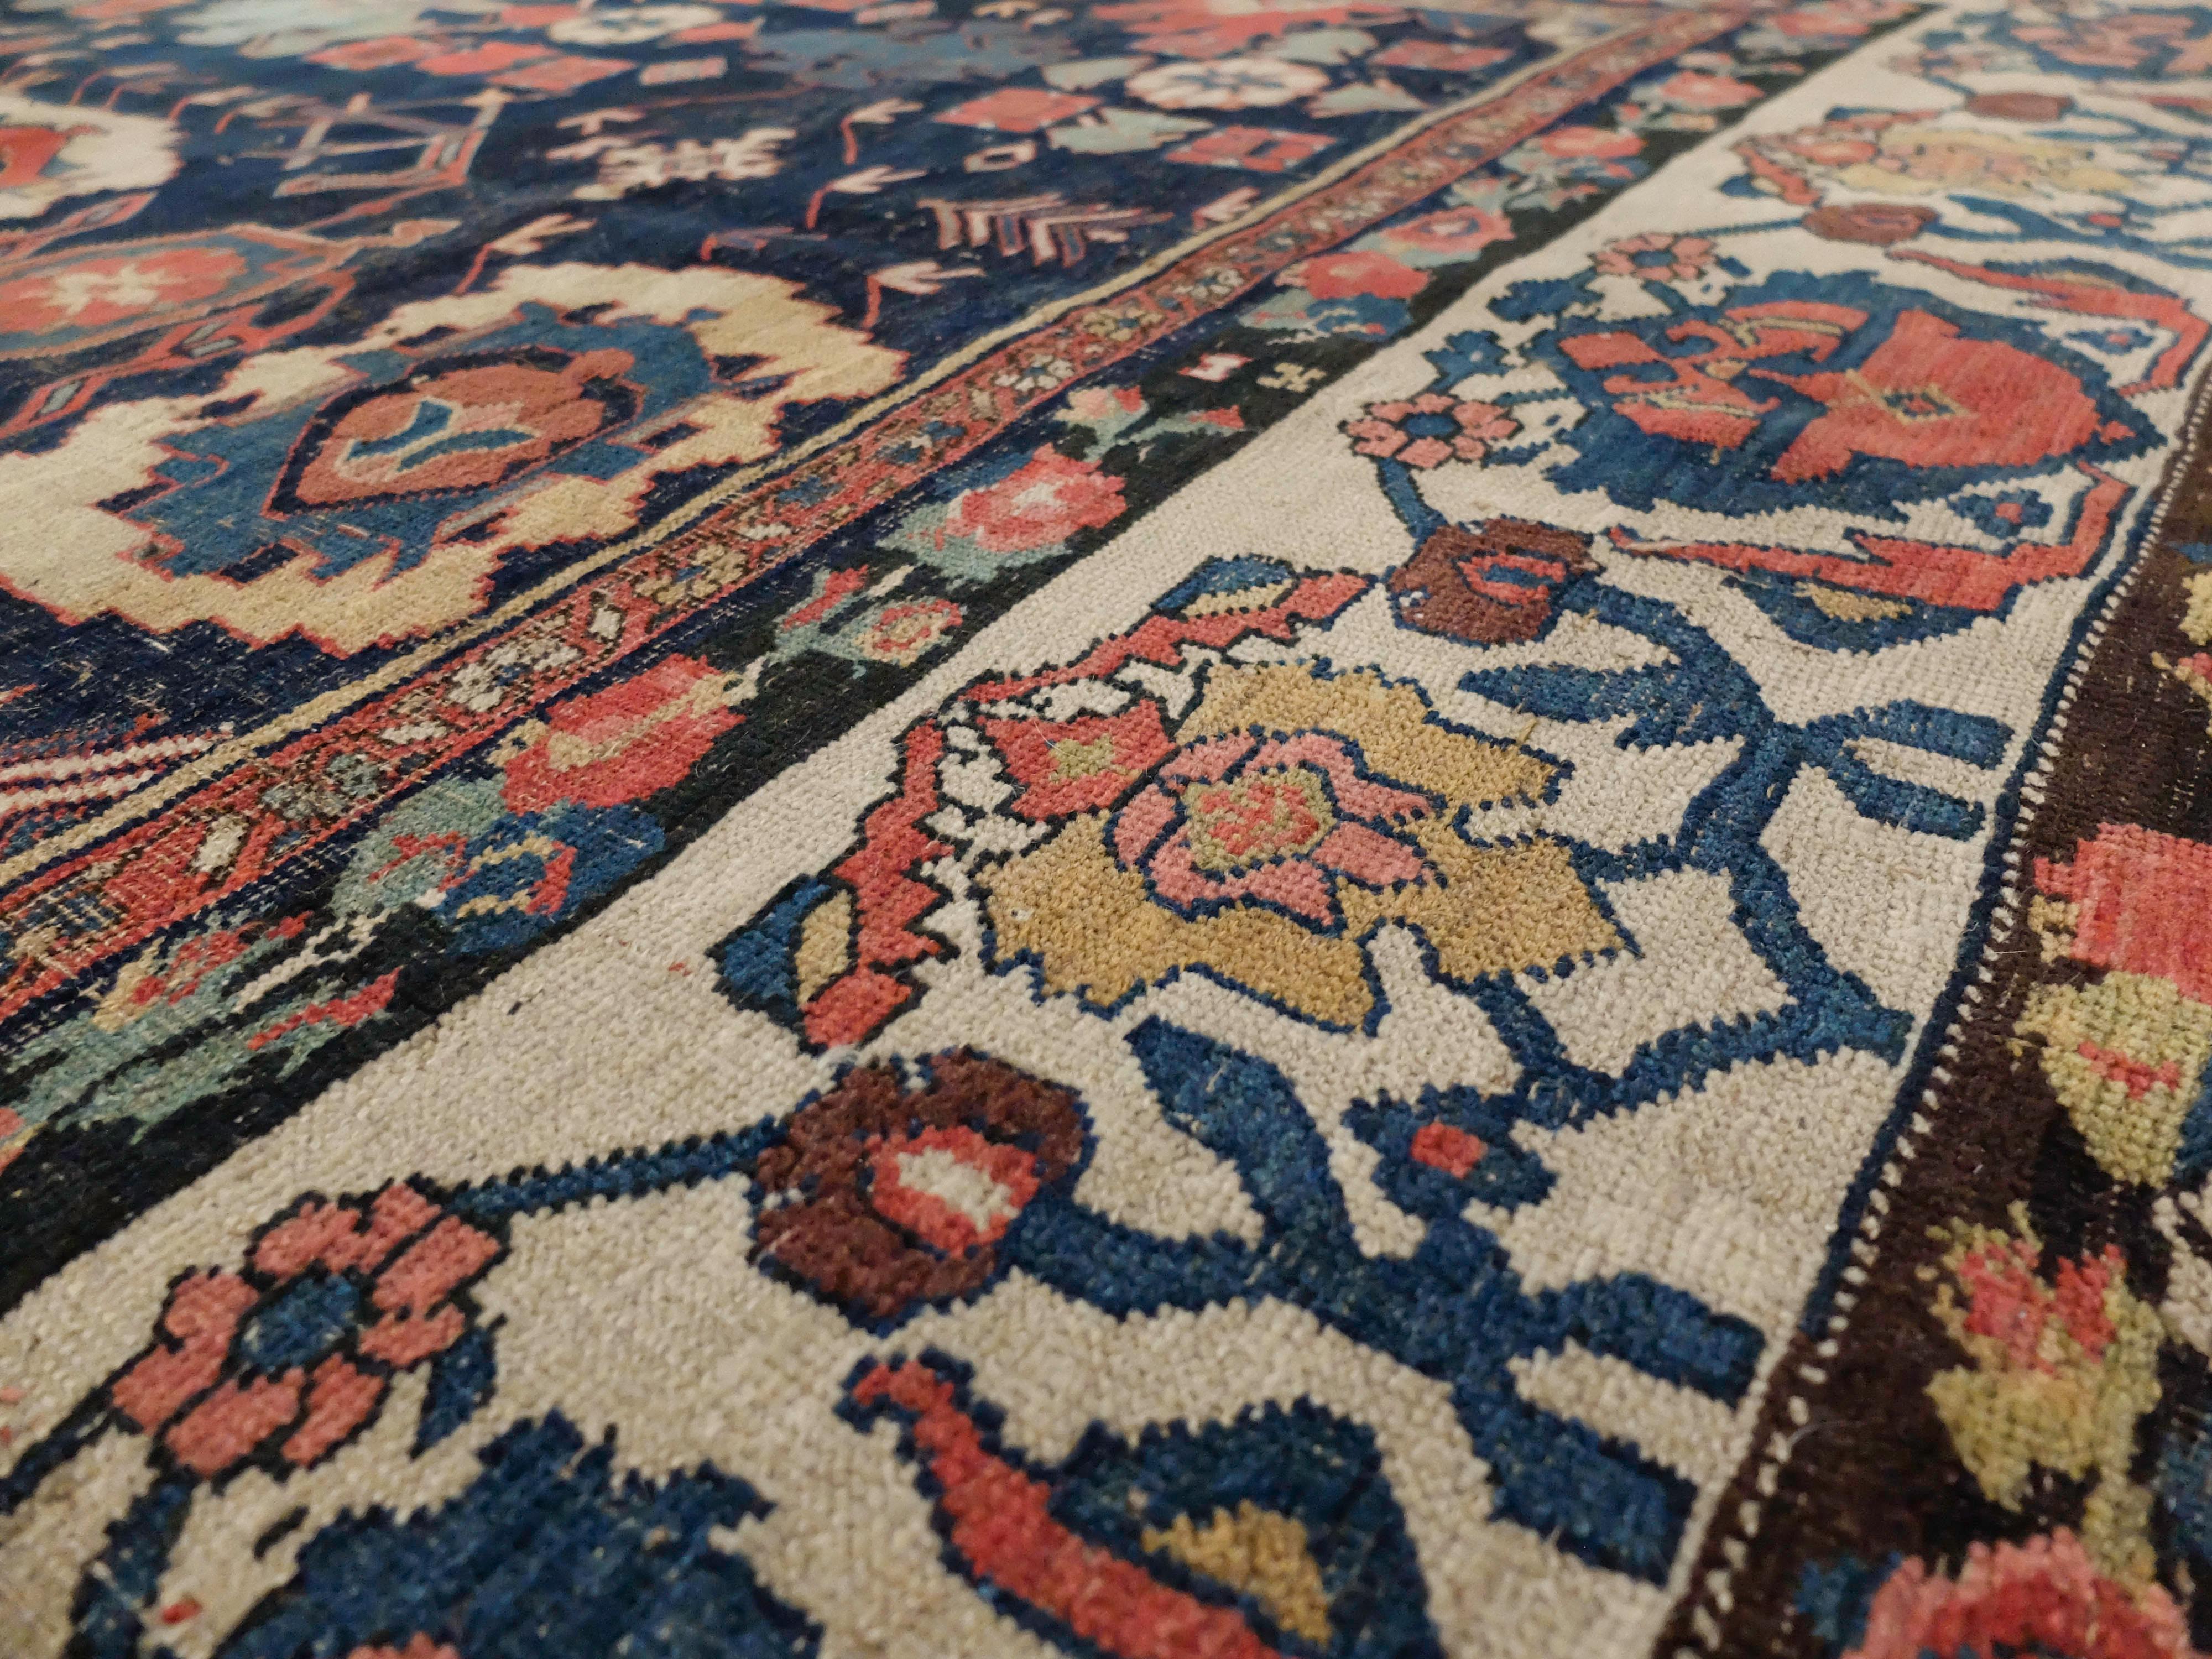 This radiant antique rug has an iconic center medallion surrounded by a sea of intricate symbols and patterns. It has primary colors ranging from indigo, yellow ochre, and Venetian red. A moment of breath is taken in the outer border where it